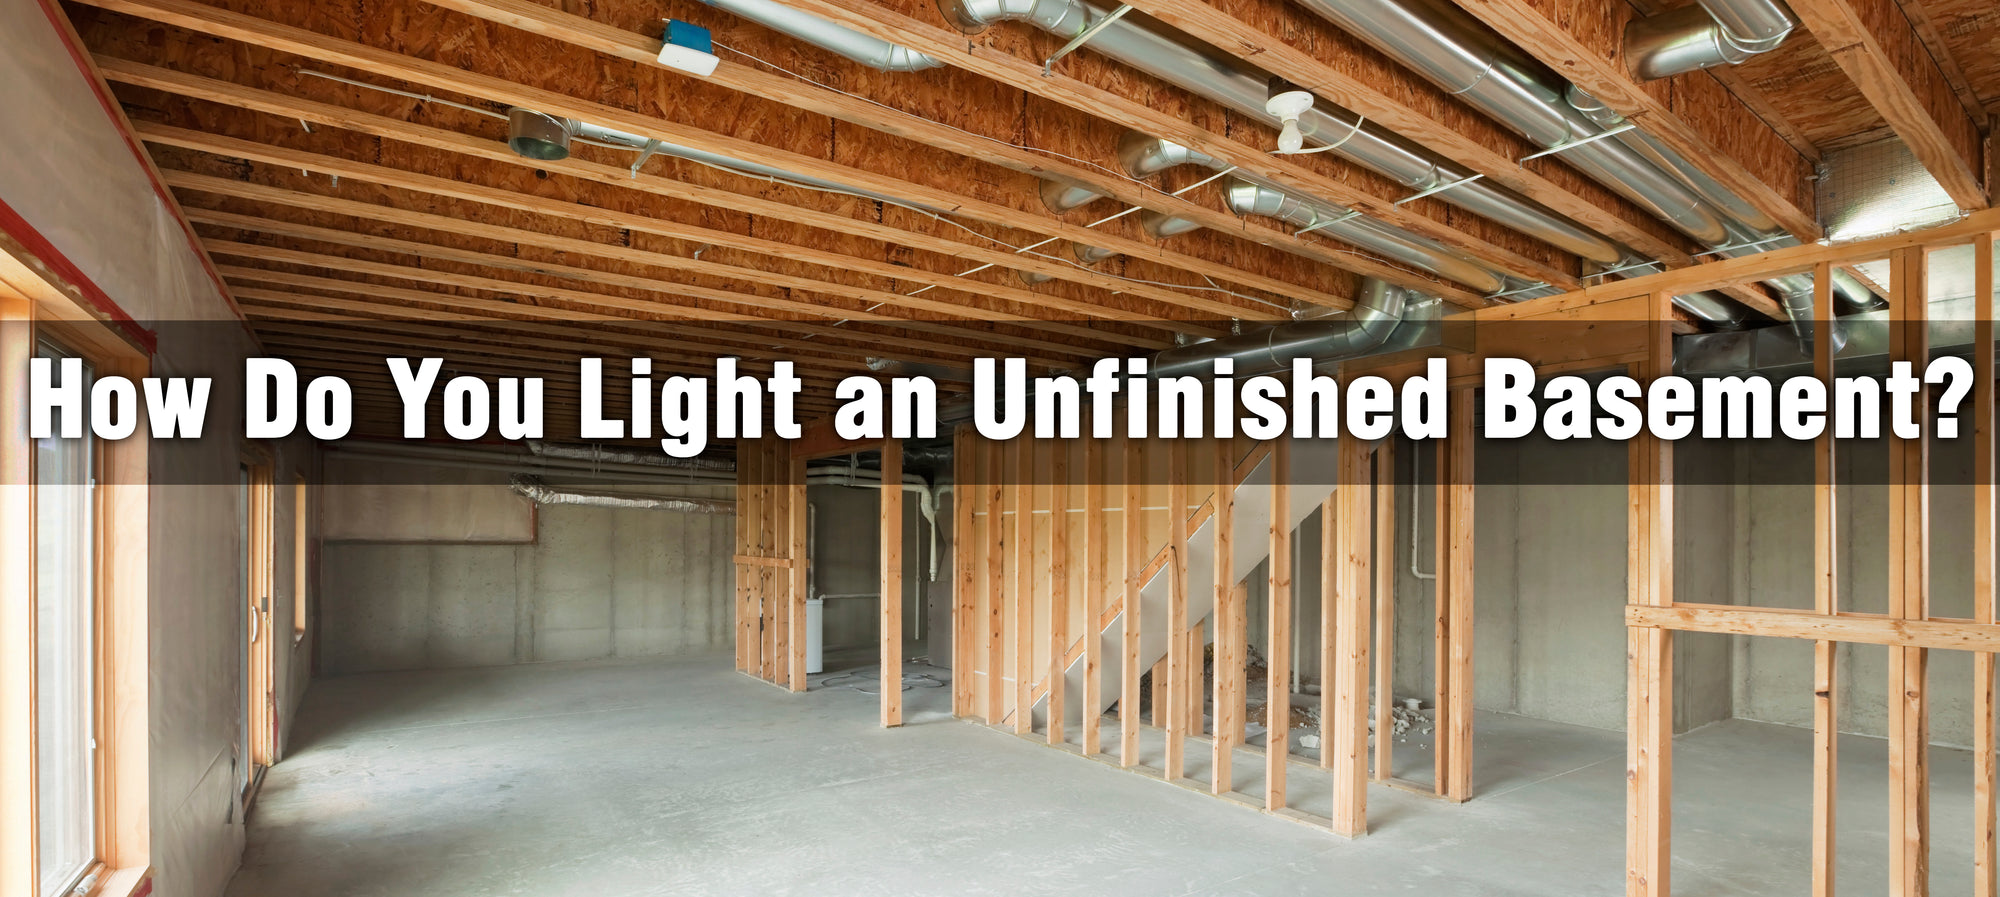 How Do You Light an Unfinished Basement?